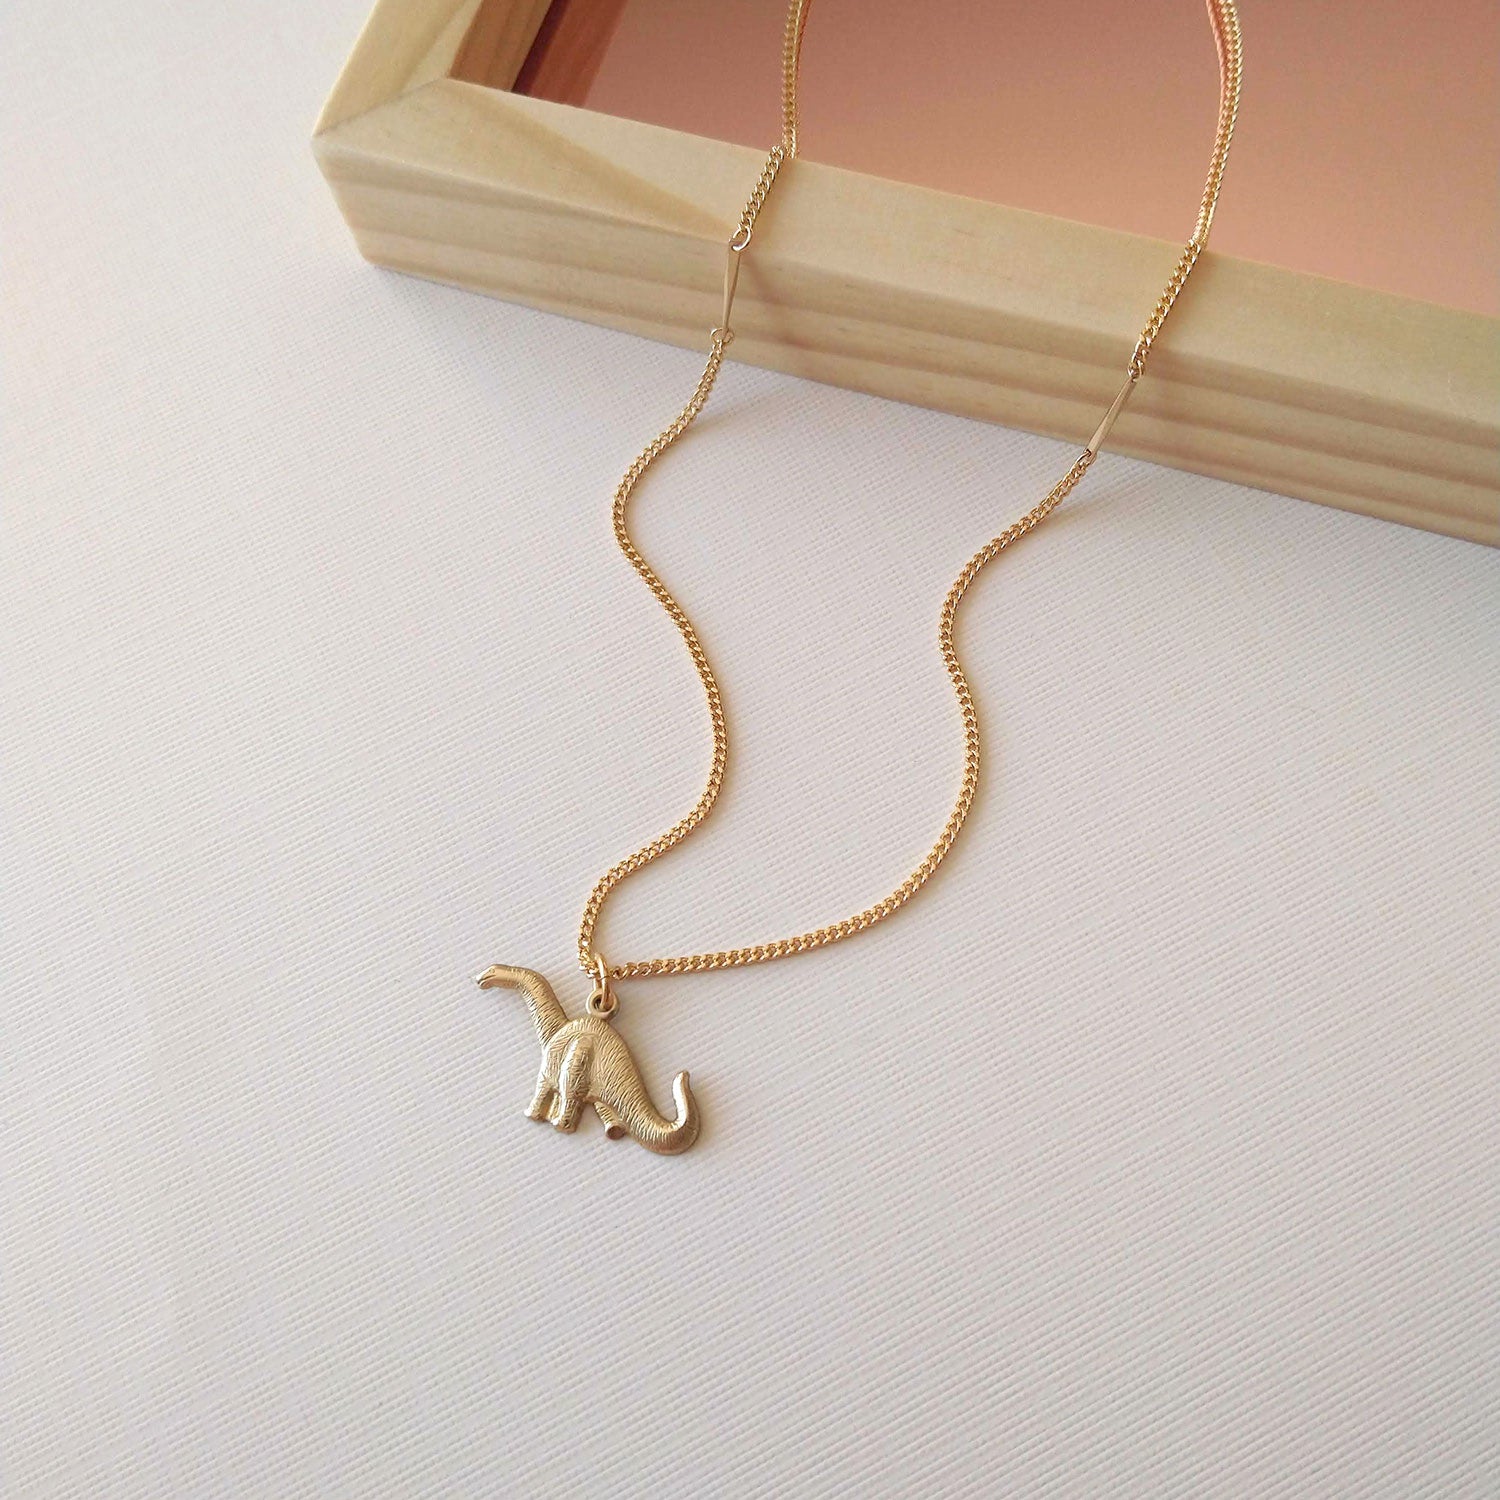 dinosaur charm necklace gold plated brass